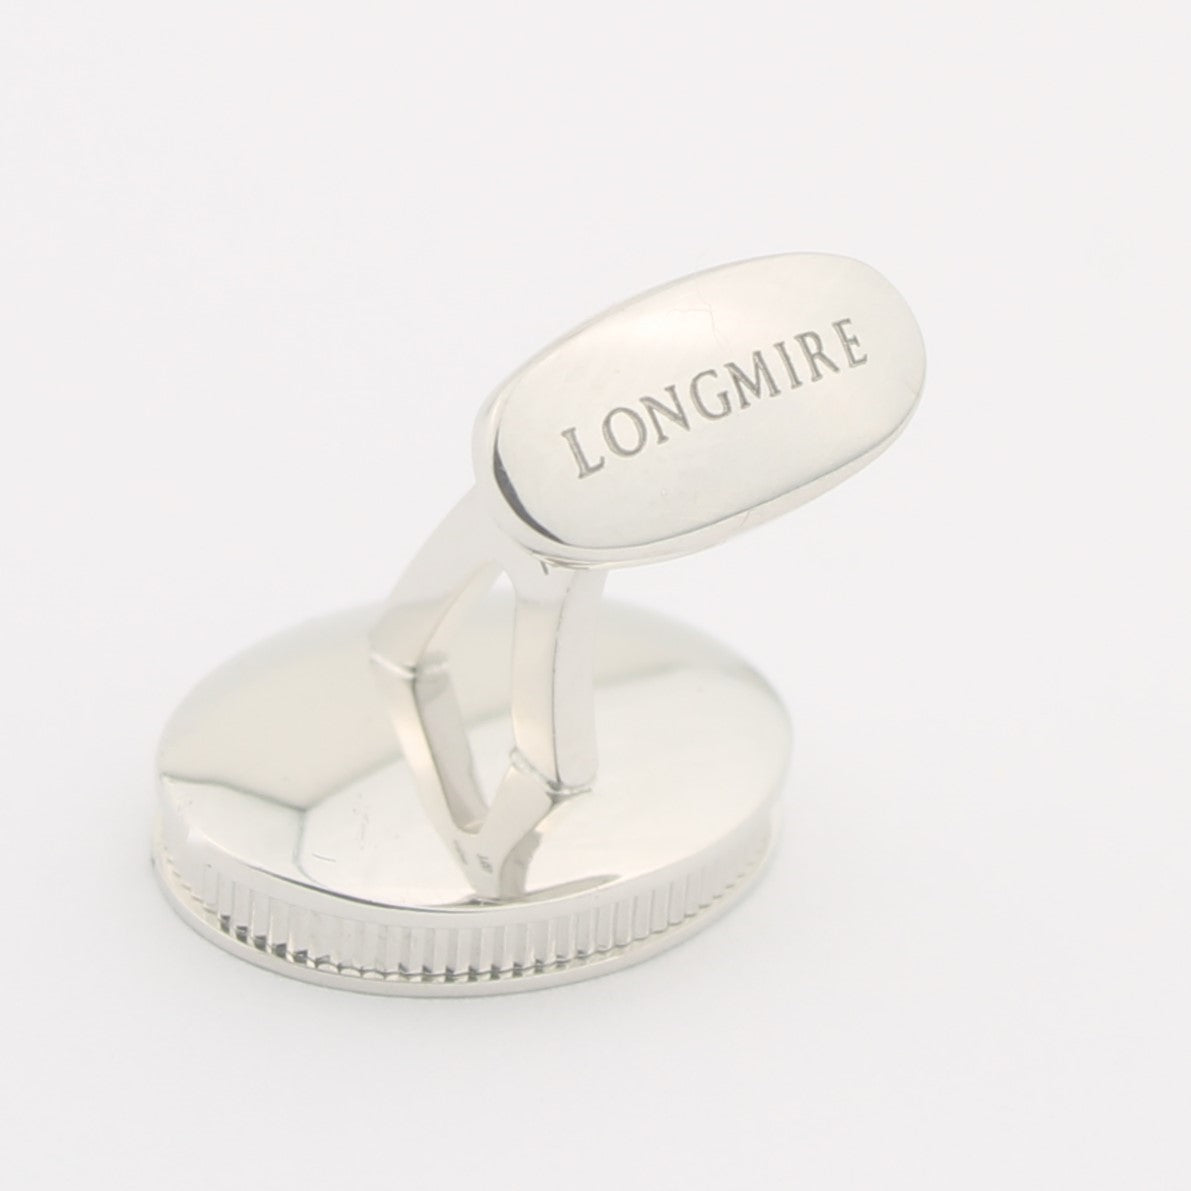 MOTHER OF PEARL WITH REEDED EDGE Cufflinks - rear